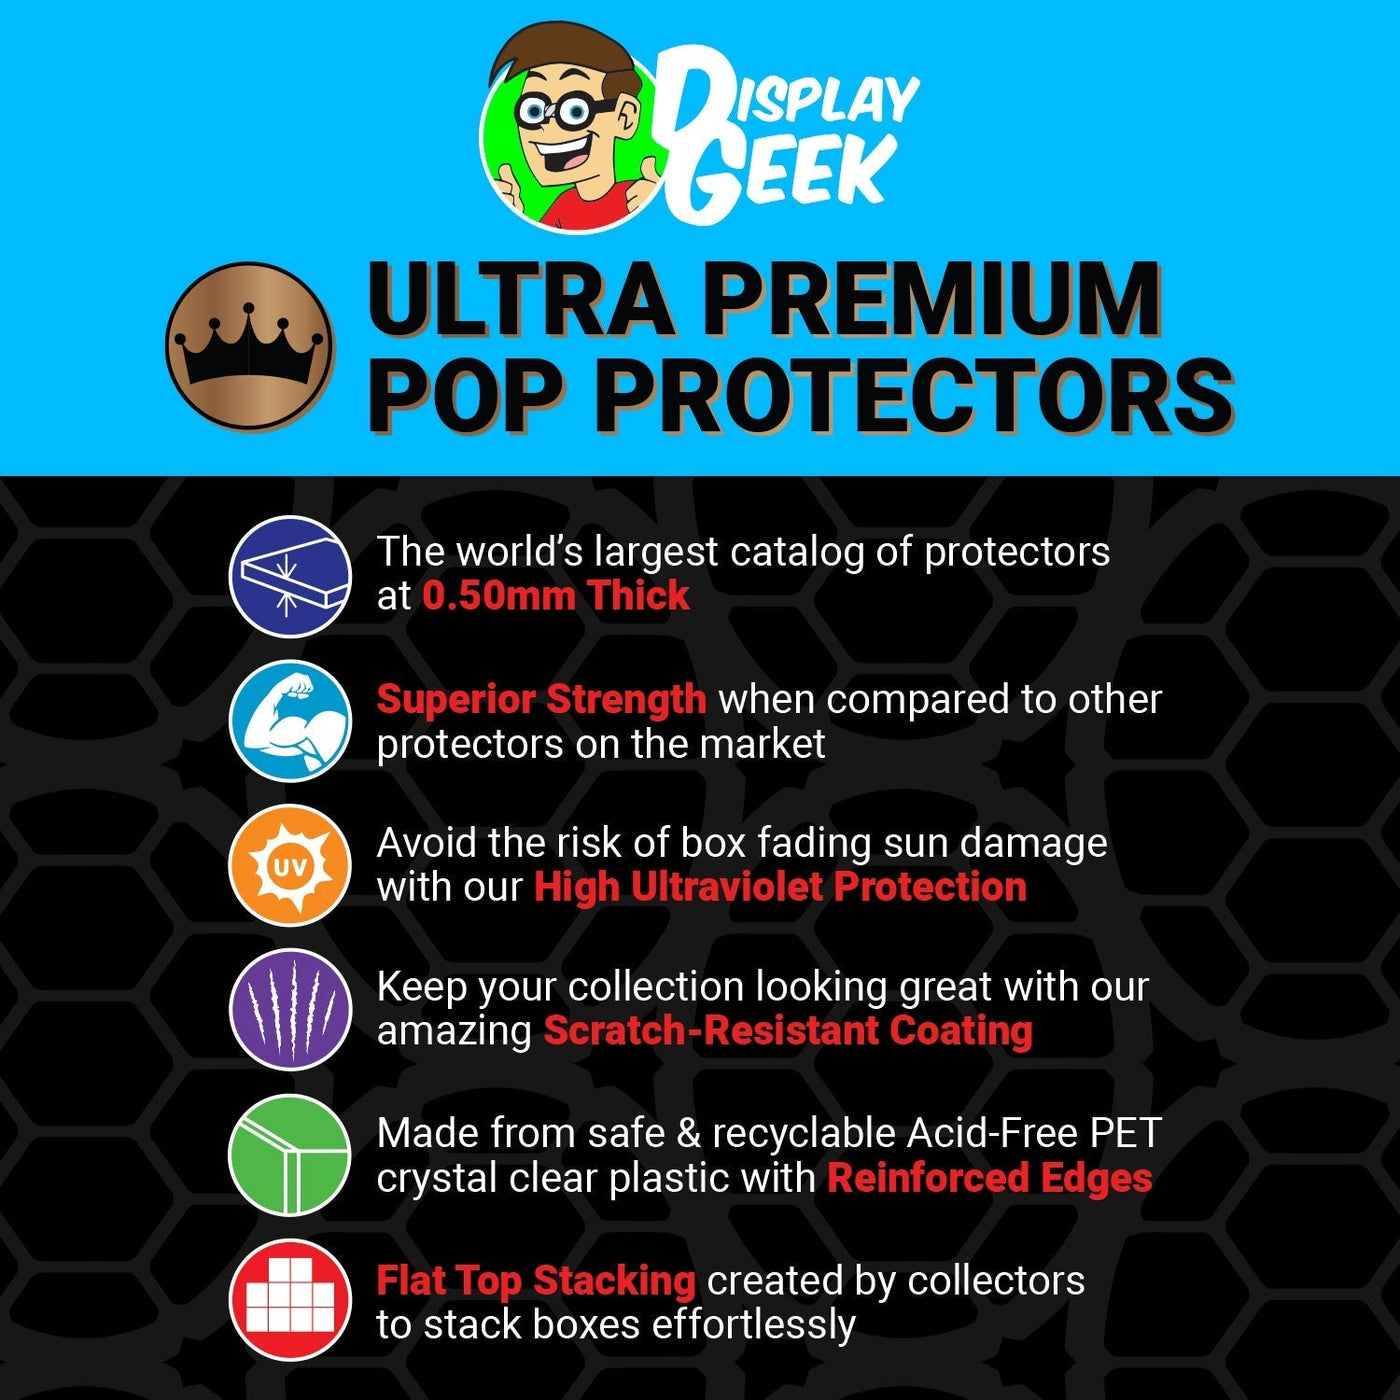 Pop Protector for Shakira Oral Fixation #40 Funko Pop Albums on The Protector Guide App by Display Geek